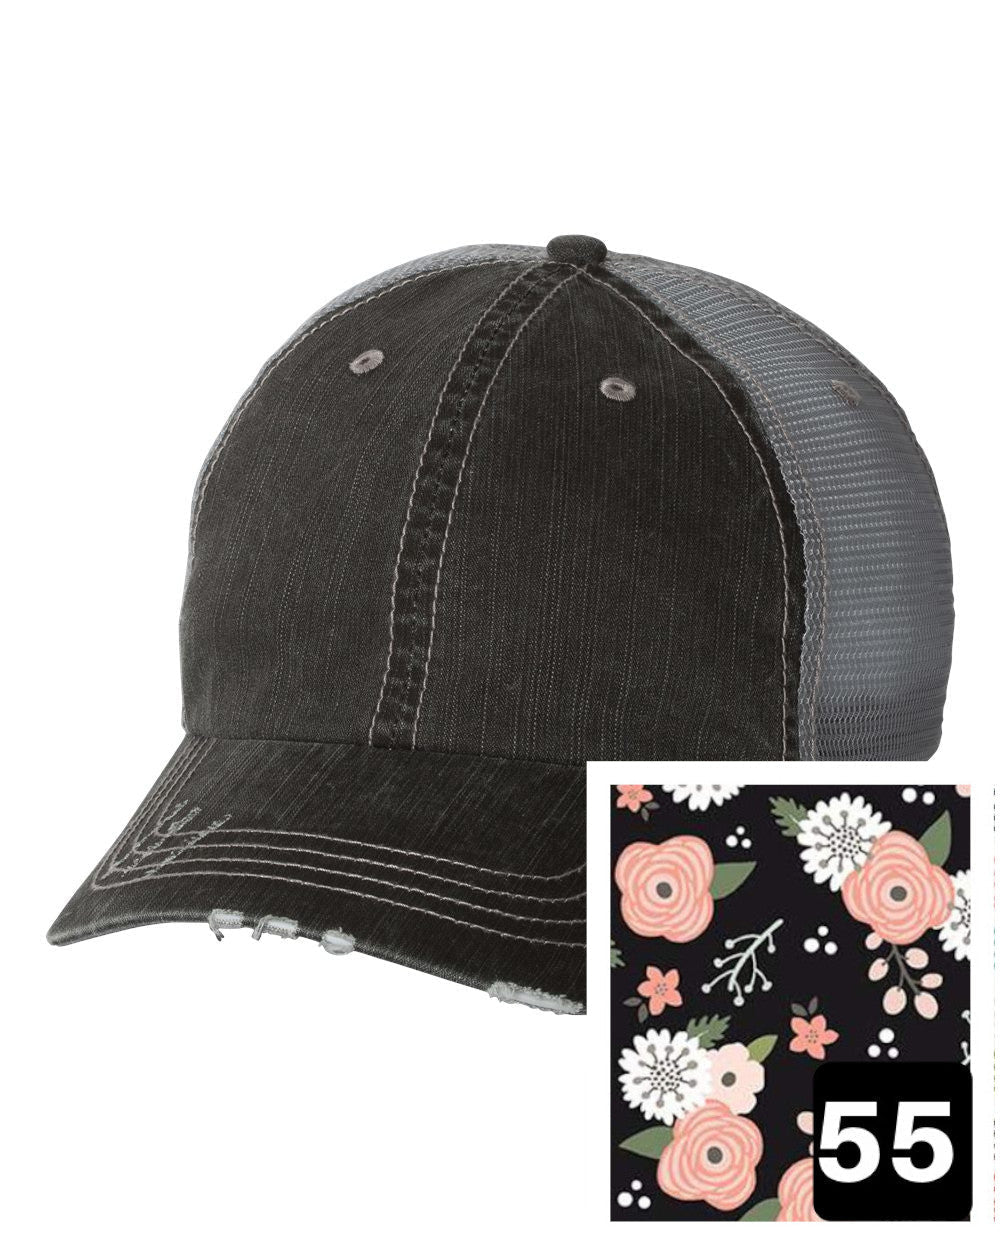 gray distressed trucker hat with petite floral on navy fabric state of New York